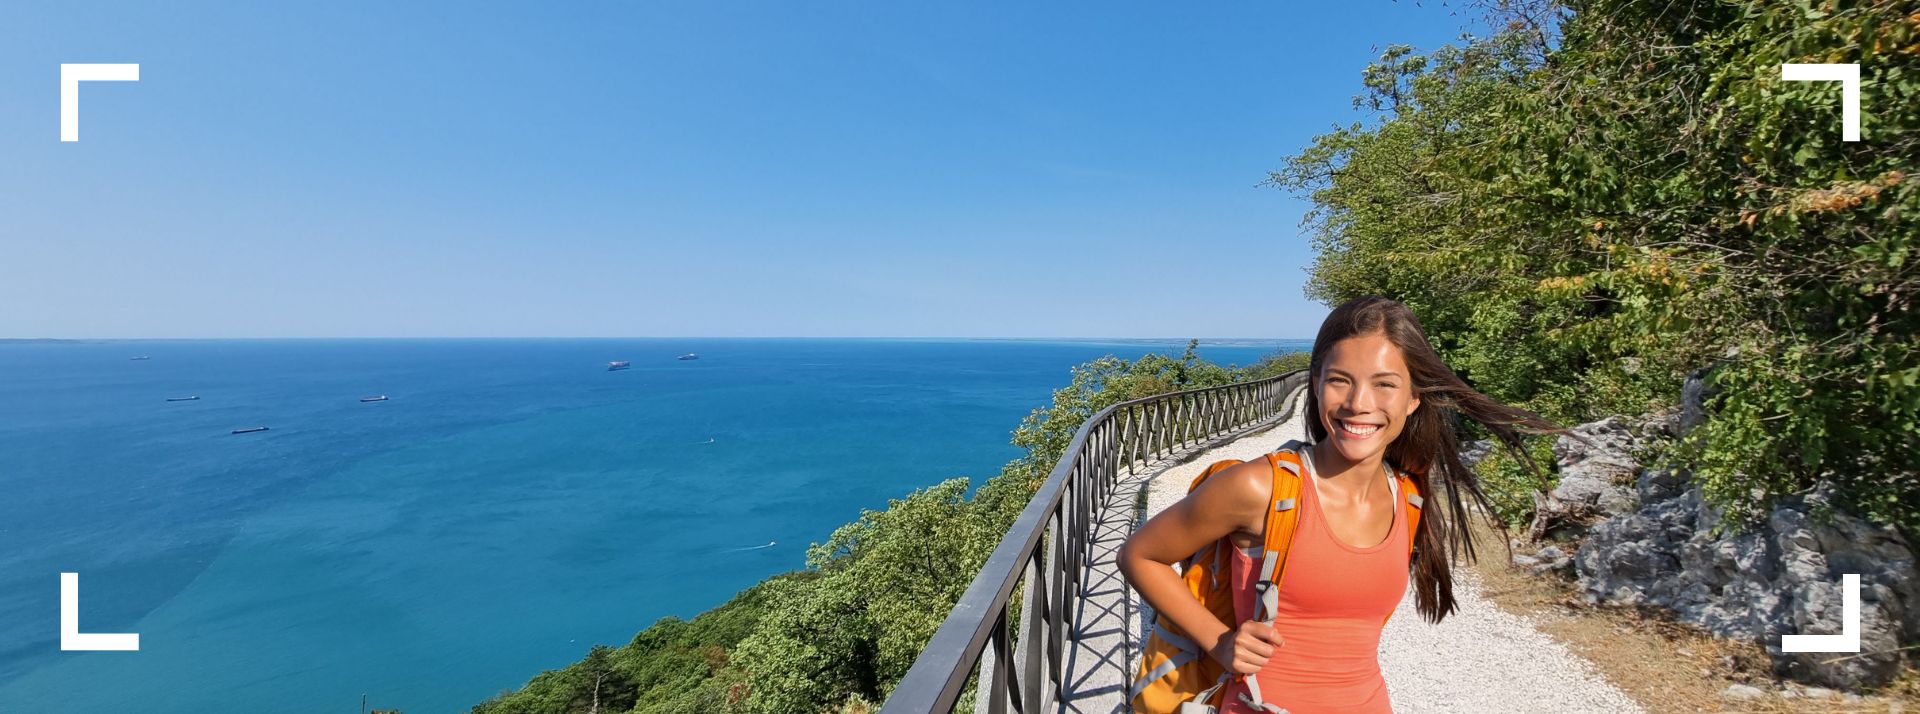 Discover what you can do on your next trip to Trieste Image